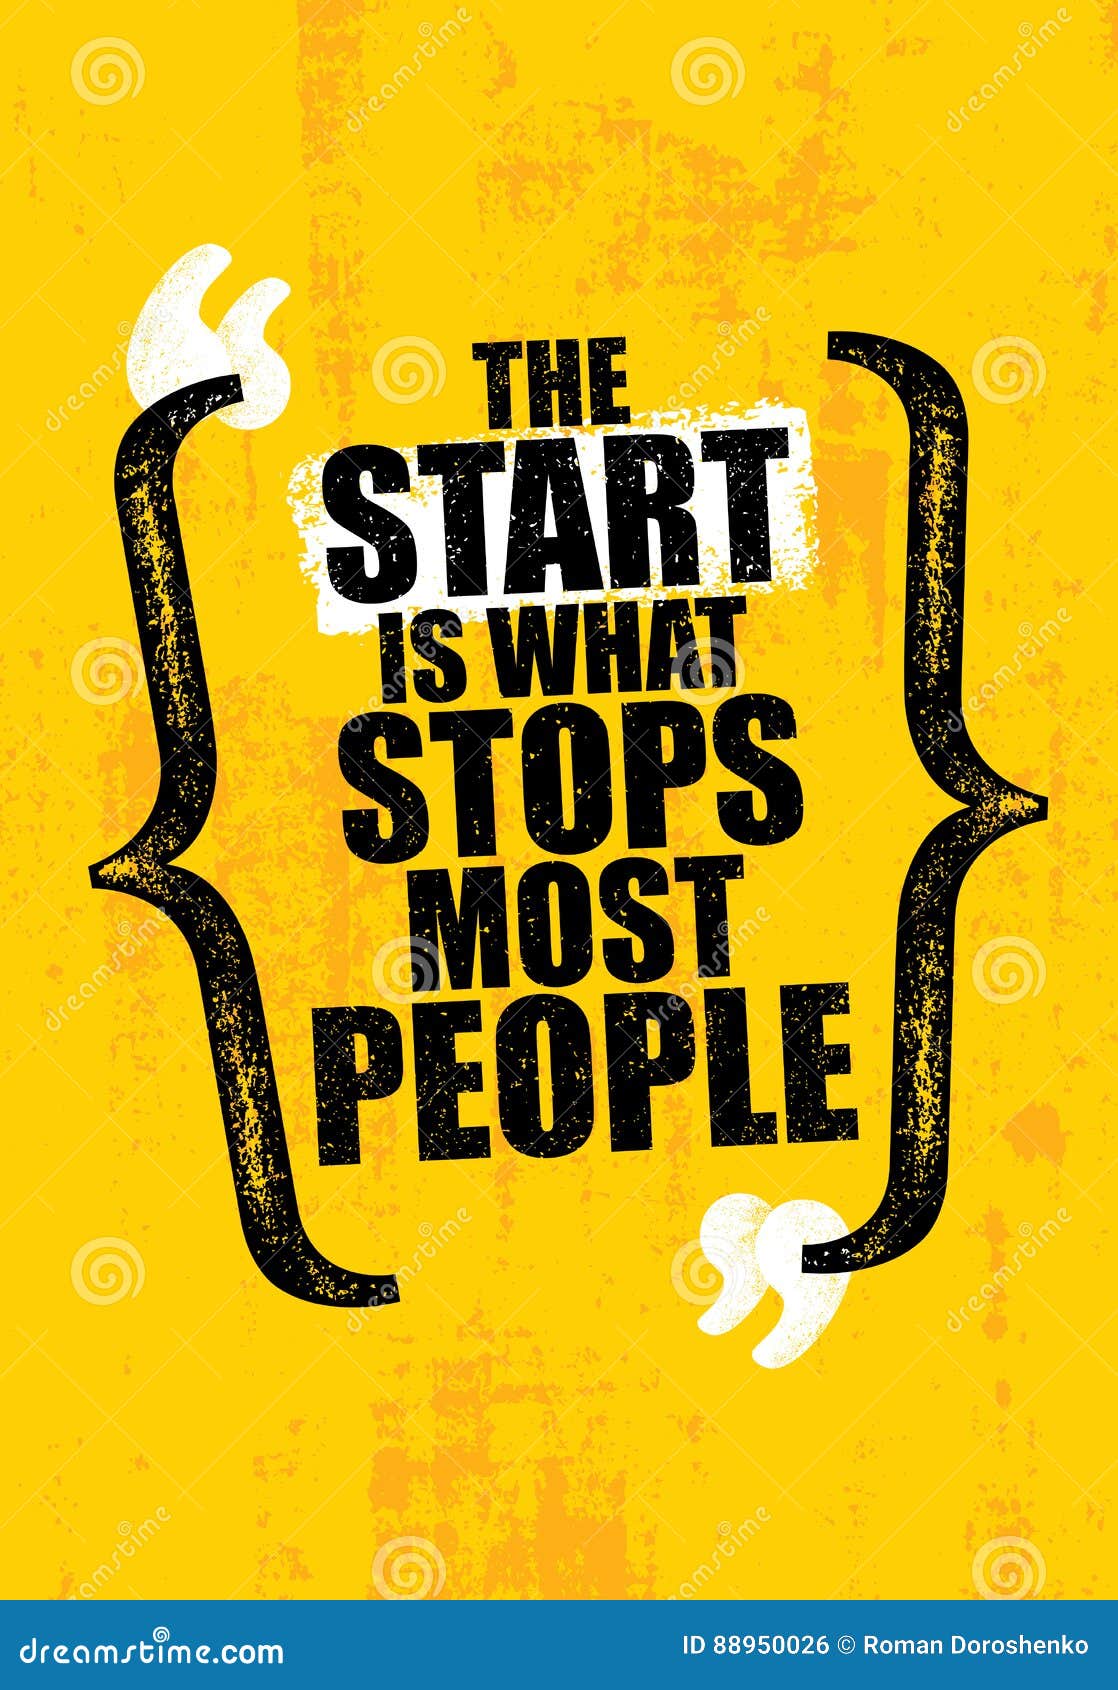 The Start is What Stops Most People. Gym Inspiring Creative Motivation